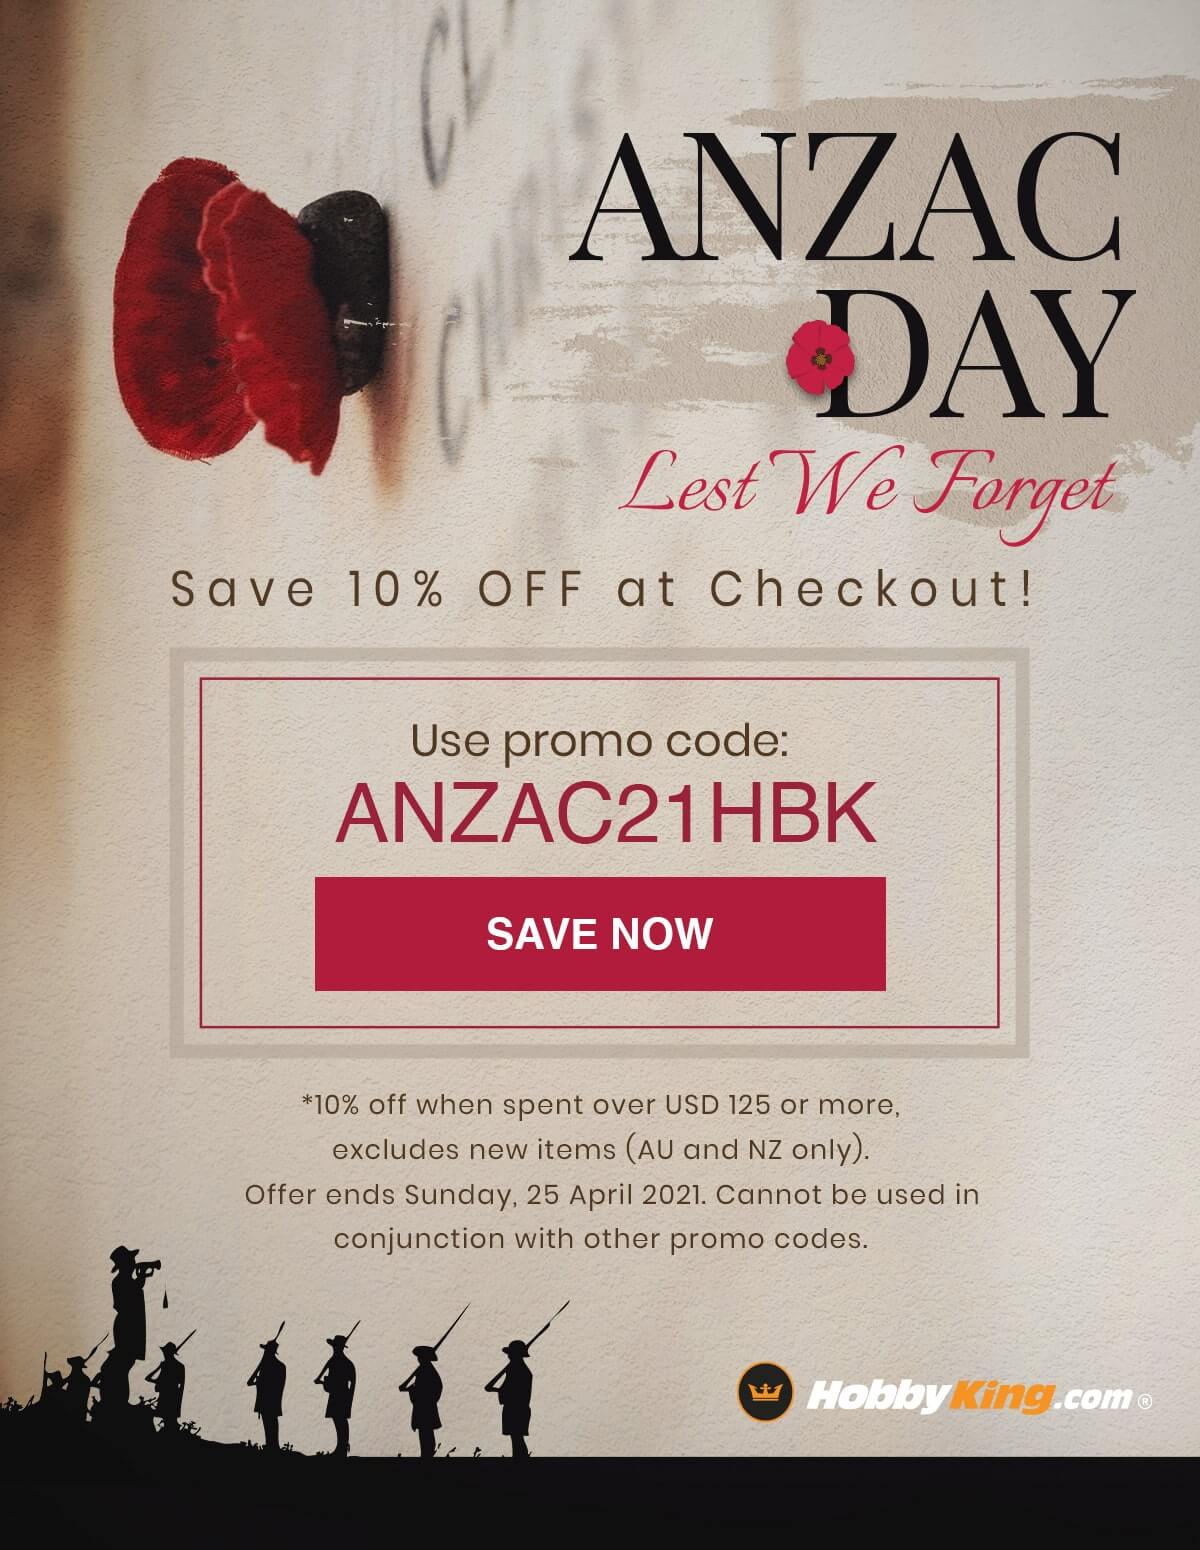 Enjoy 10% off for your order with our ANZAC Day Coupon Code, only valid for Australia and New Zealand: ANZAC21HBK. Coupon valid with a minimum of US$125, excluding New Products. Offer ends Sunday, 25 April 2021 (11:59 GMT+8). Cannot be used in conjunction with other promo codes.